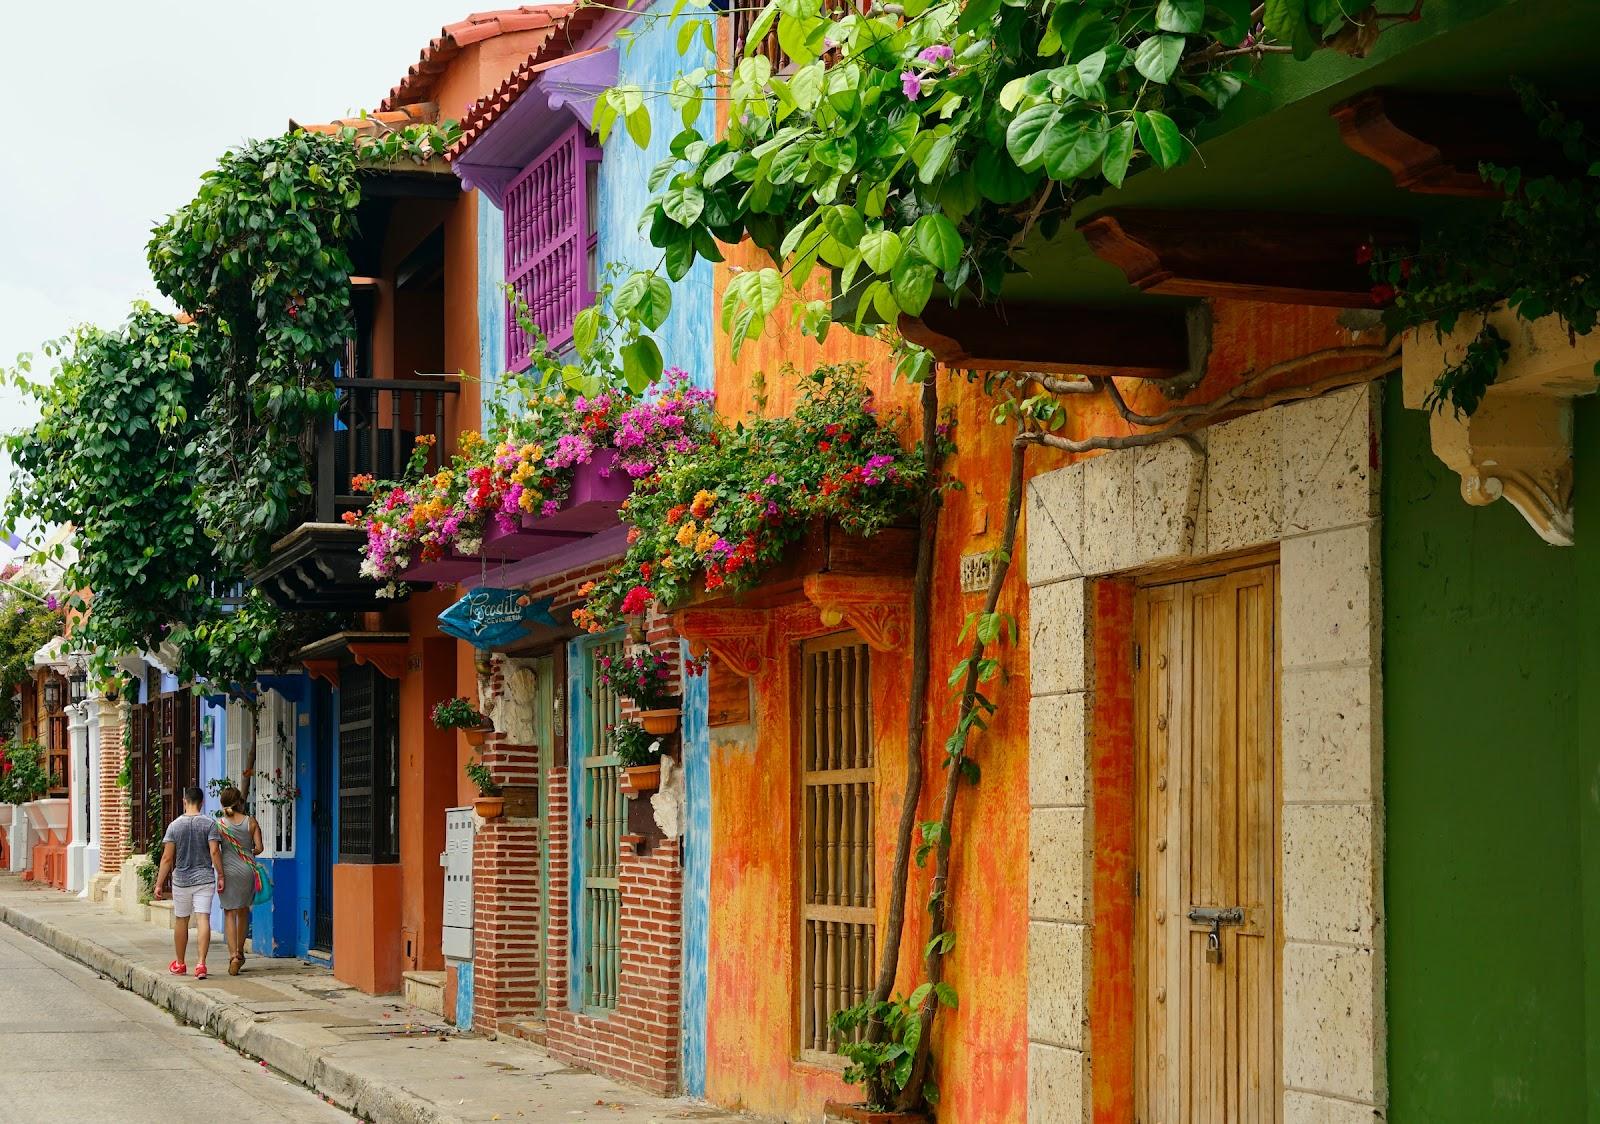 A row of colourful houses in Colombia